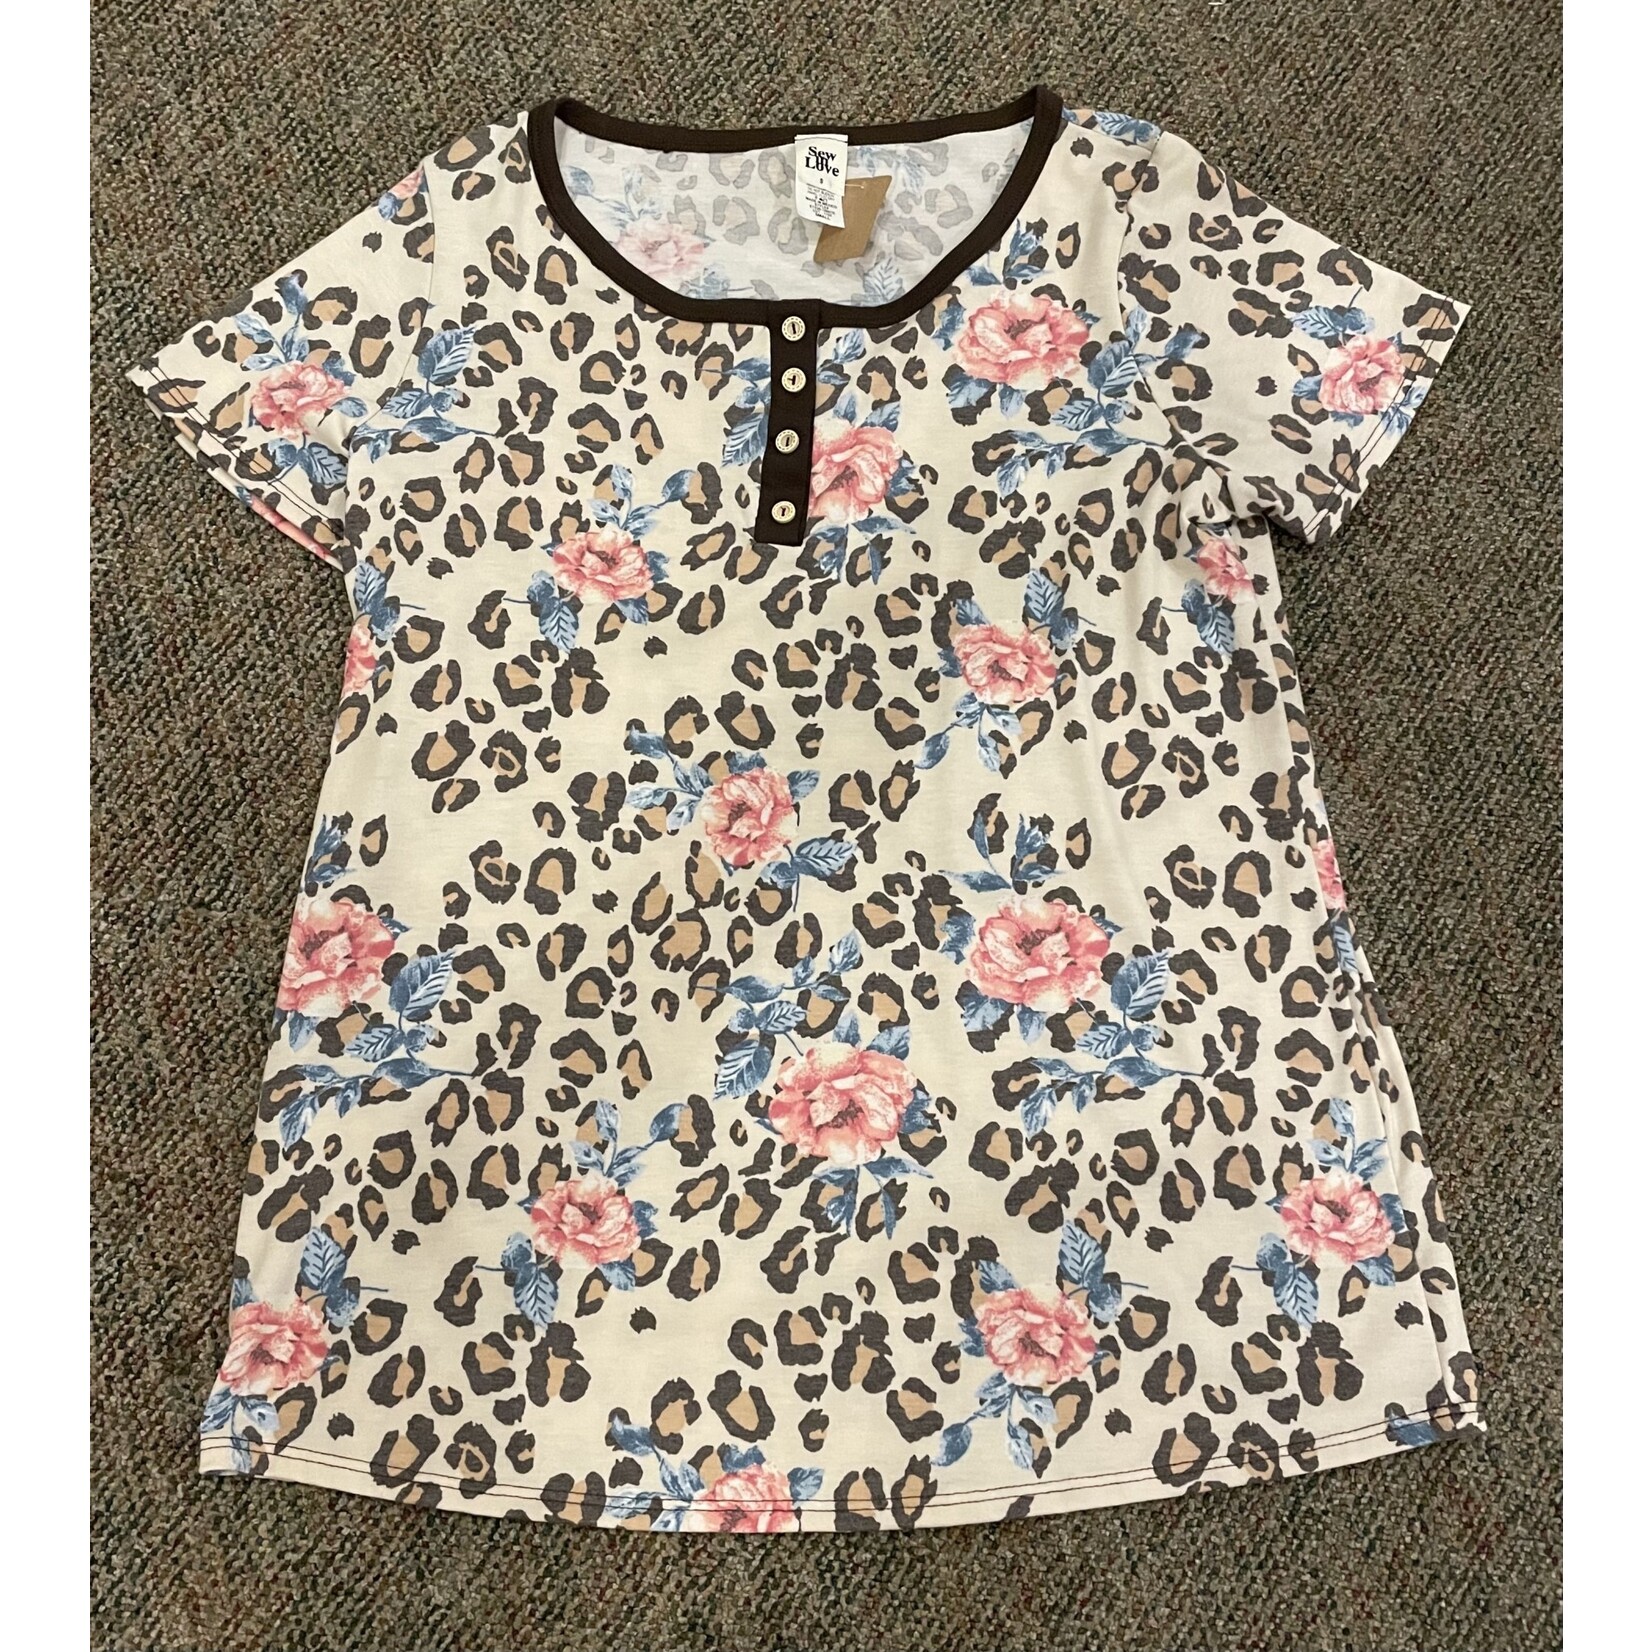 Sew in Love Leopard Floral Top S